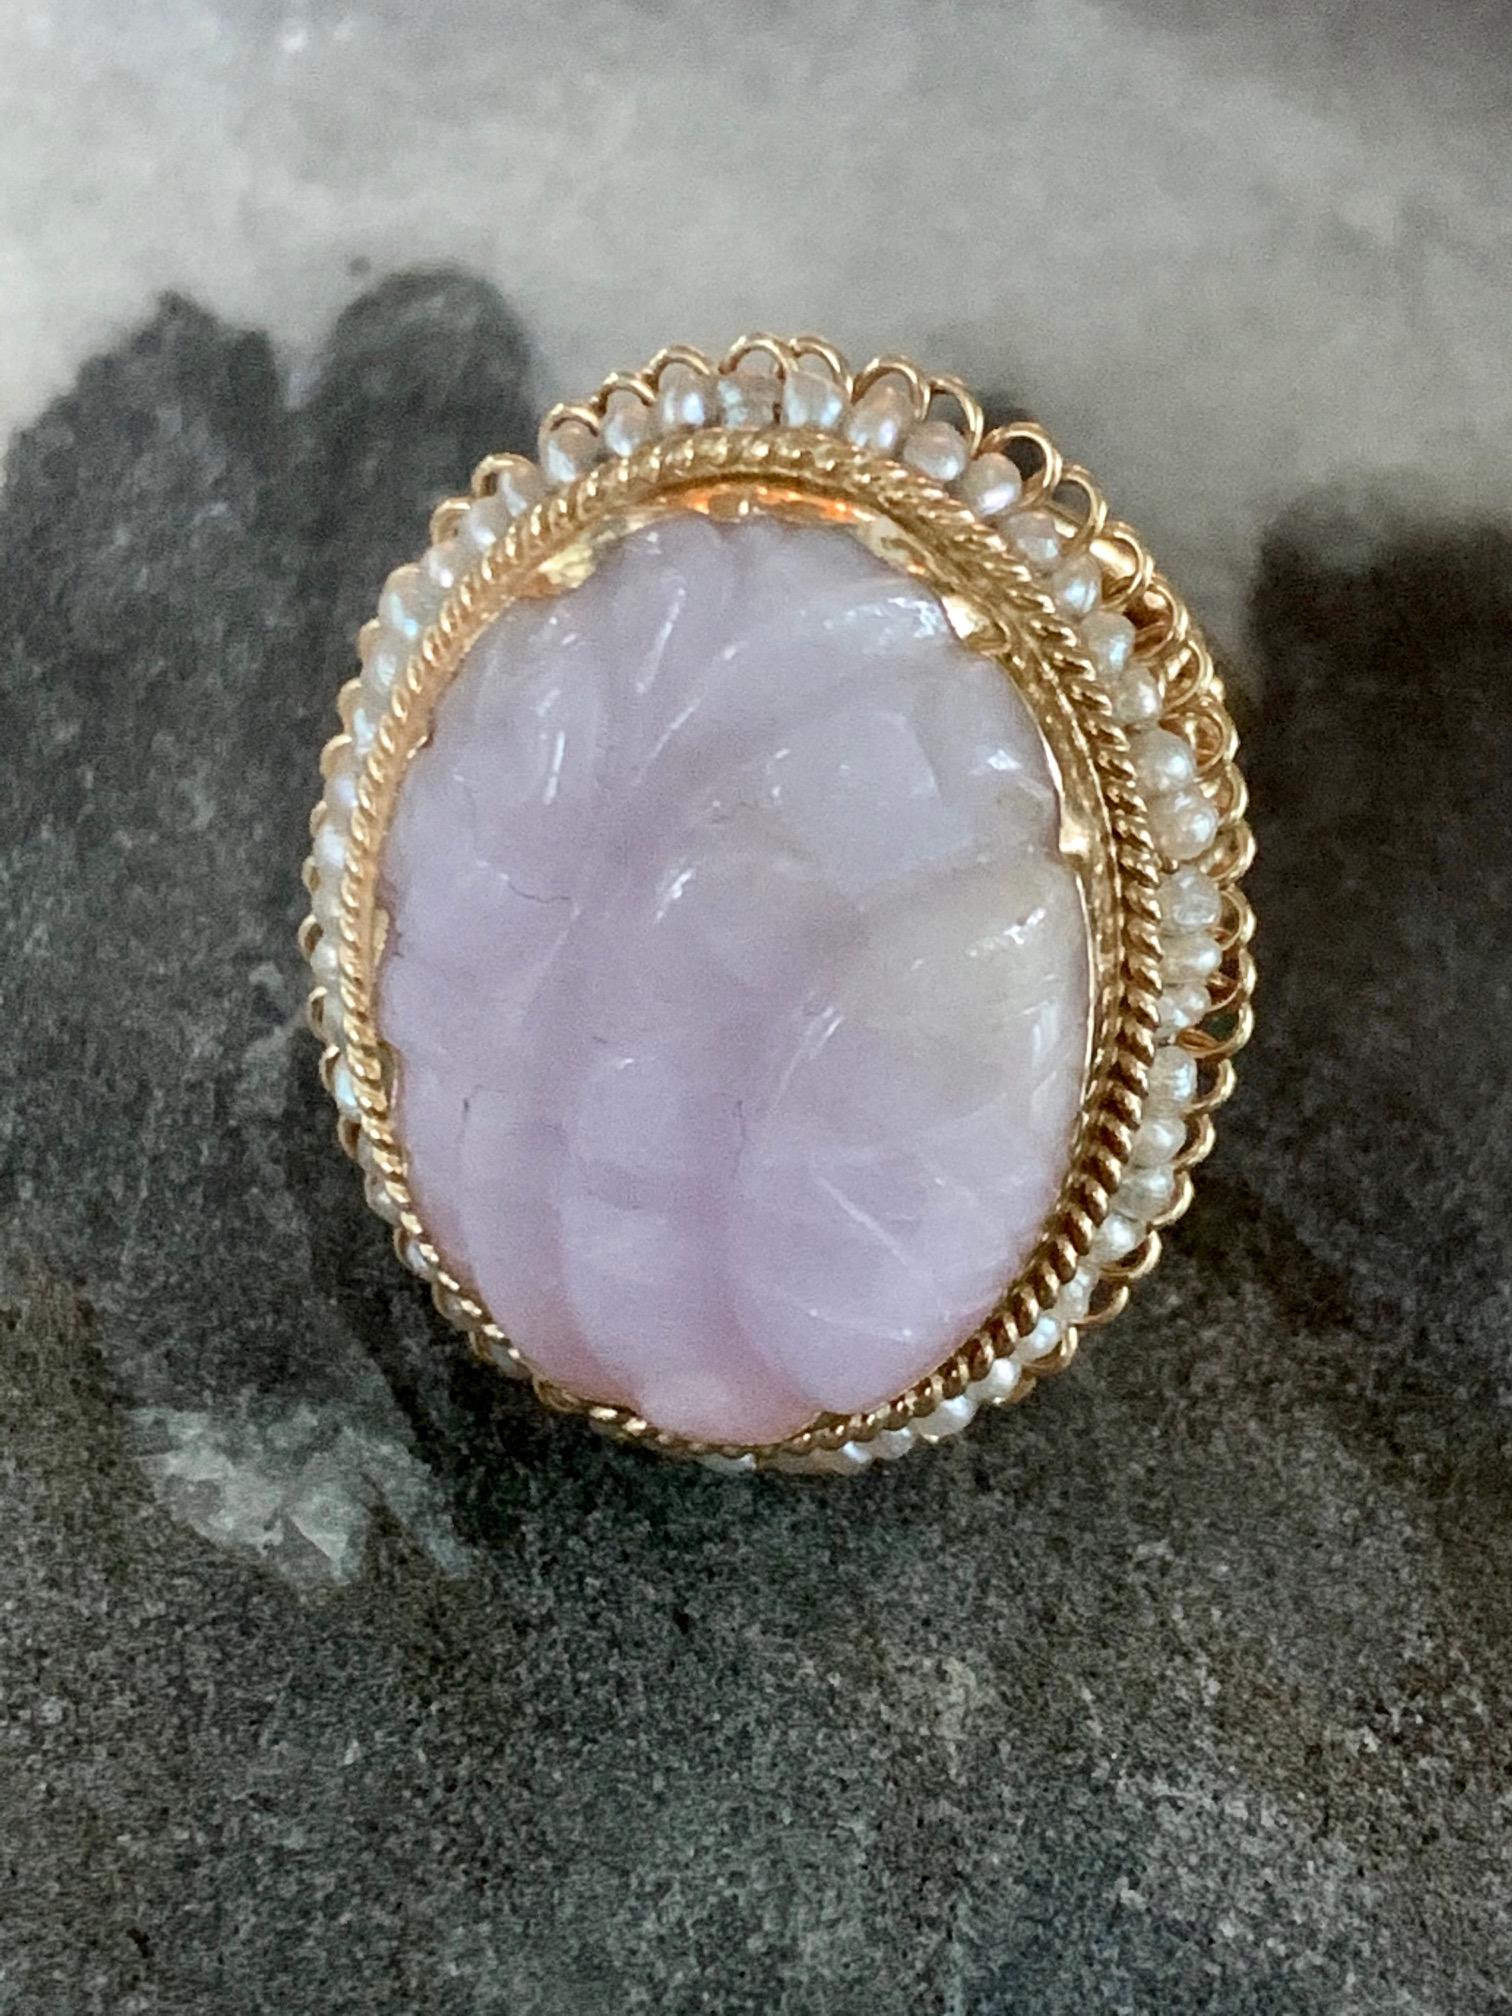 Women's Vintage Lavender Jade Carved Stone and Pearl 14 Karat Yellow Gold Ring - Size 6